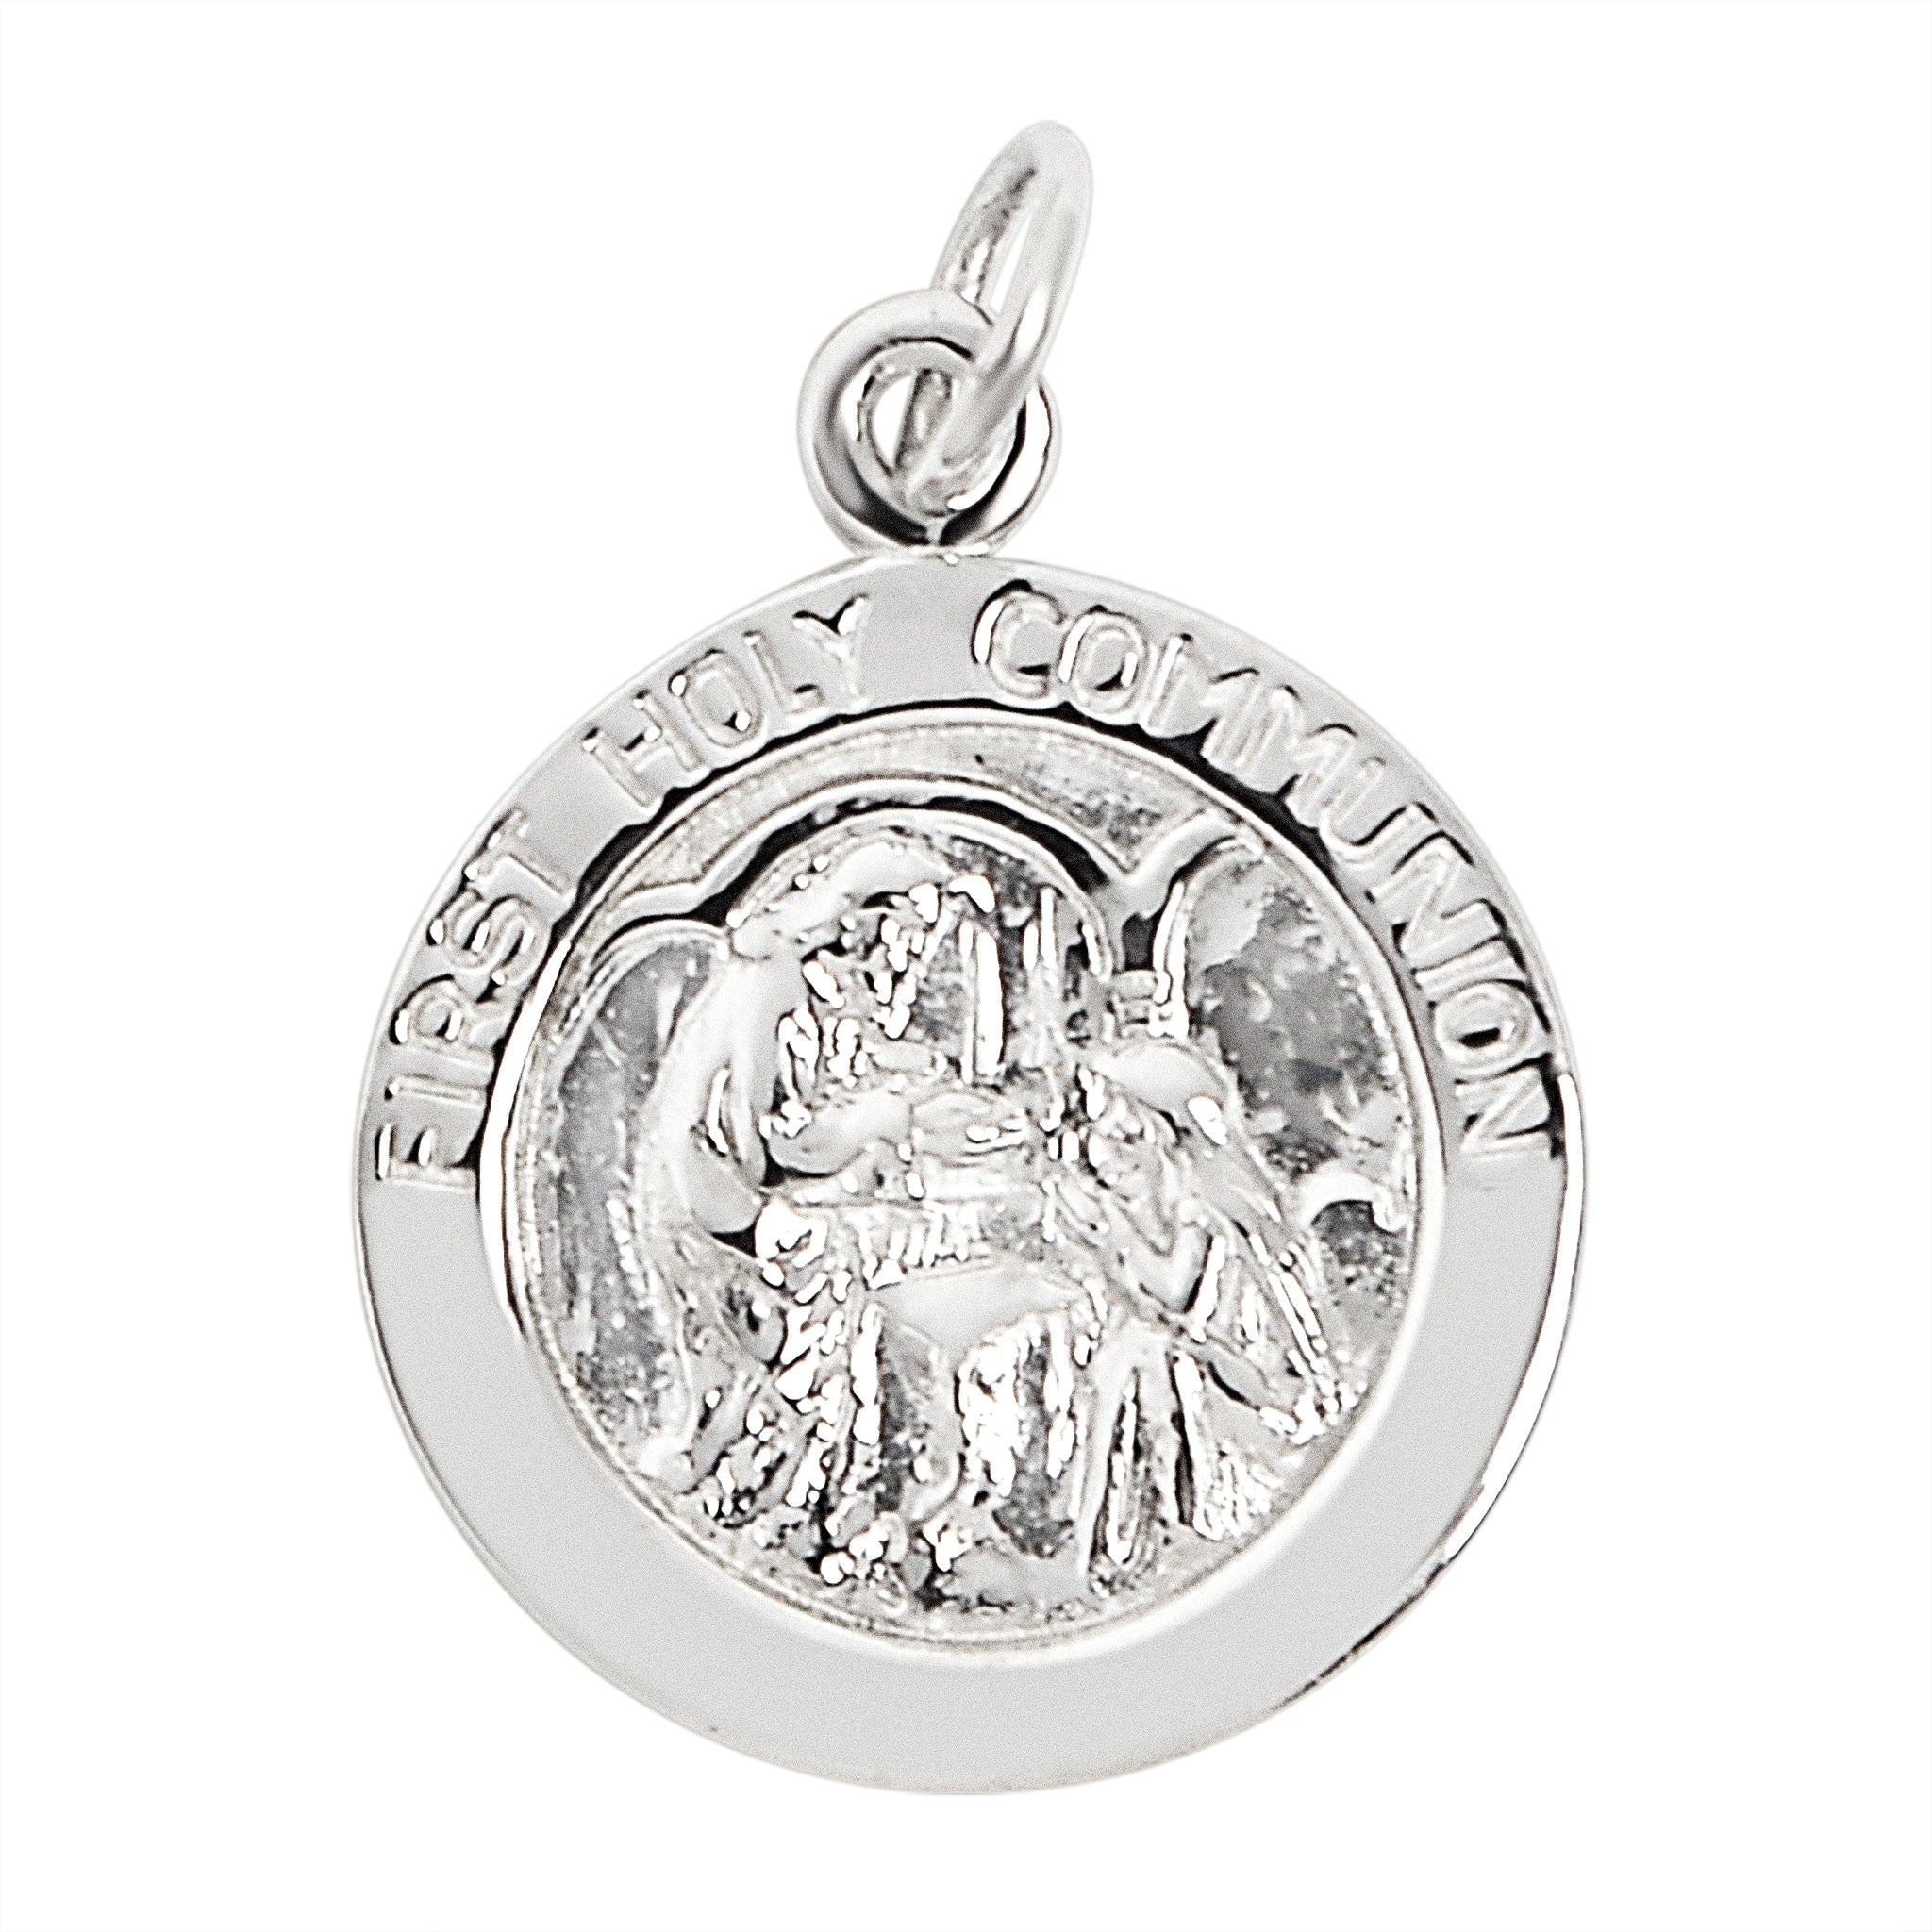 Sterling Silver "First Holy Communion" Pendant / SSP0170-Handmade Silver Necklace- Hypoallergenic Jewelry- Charm Pendent- Handmade Pendant- Gift Pendent